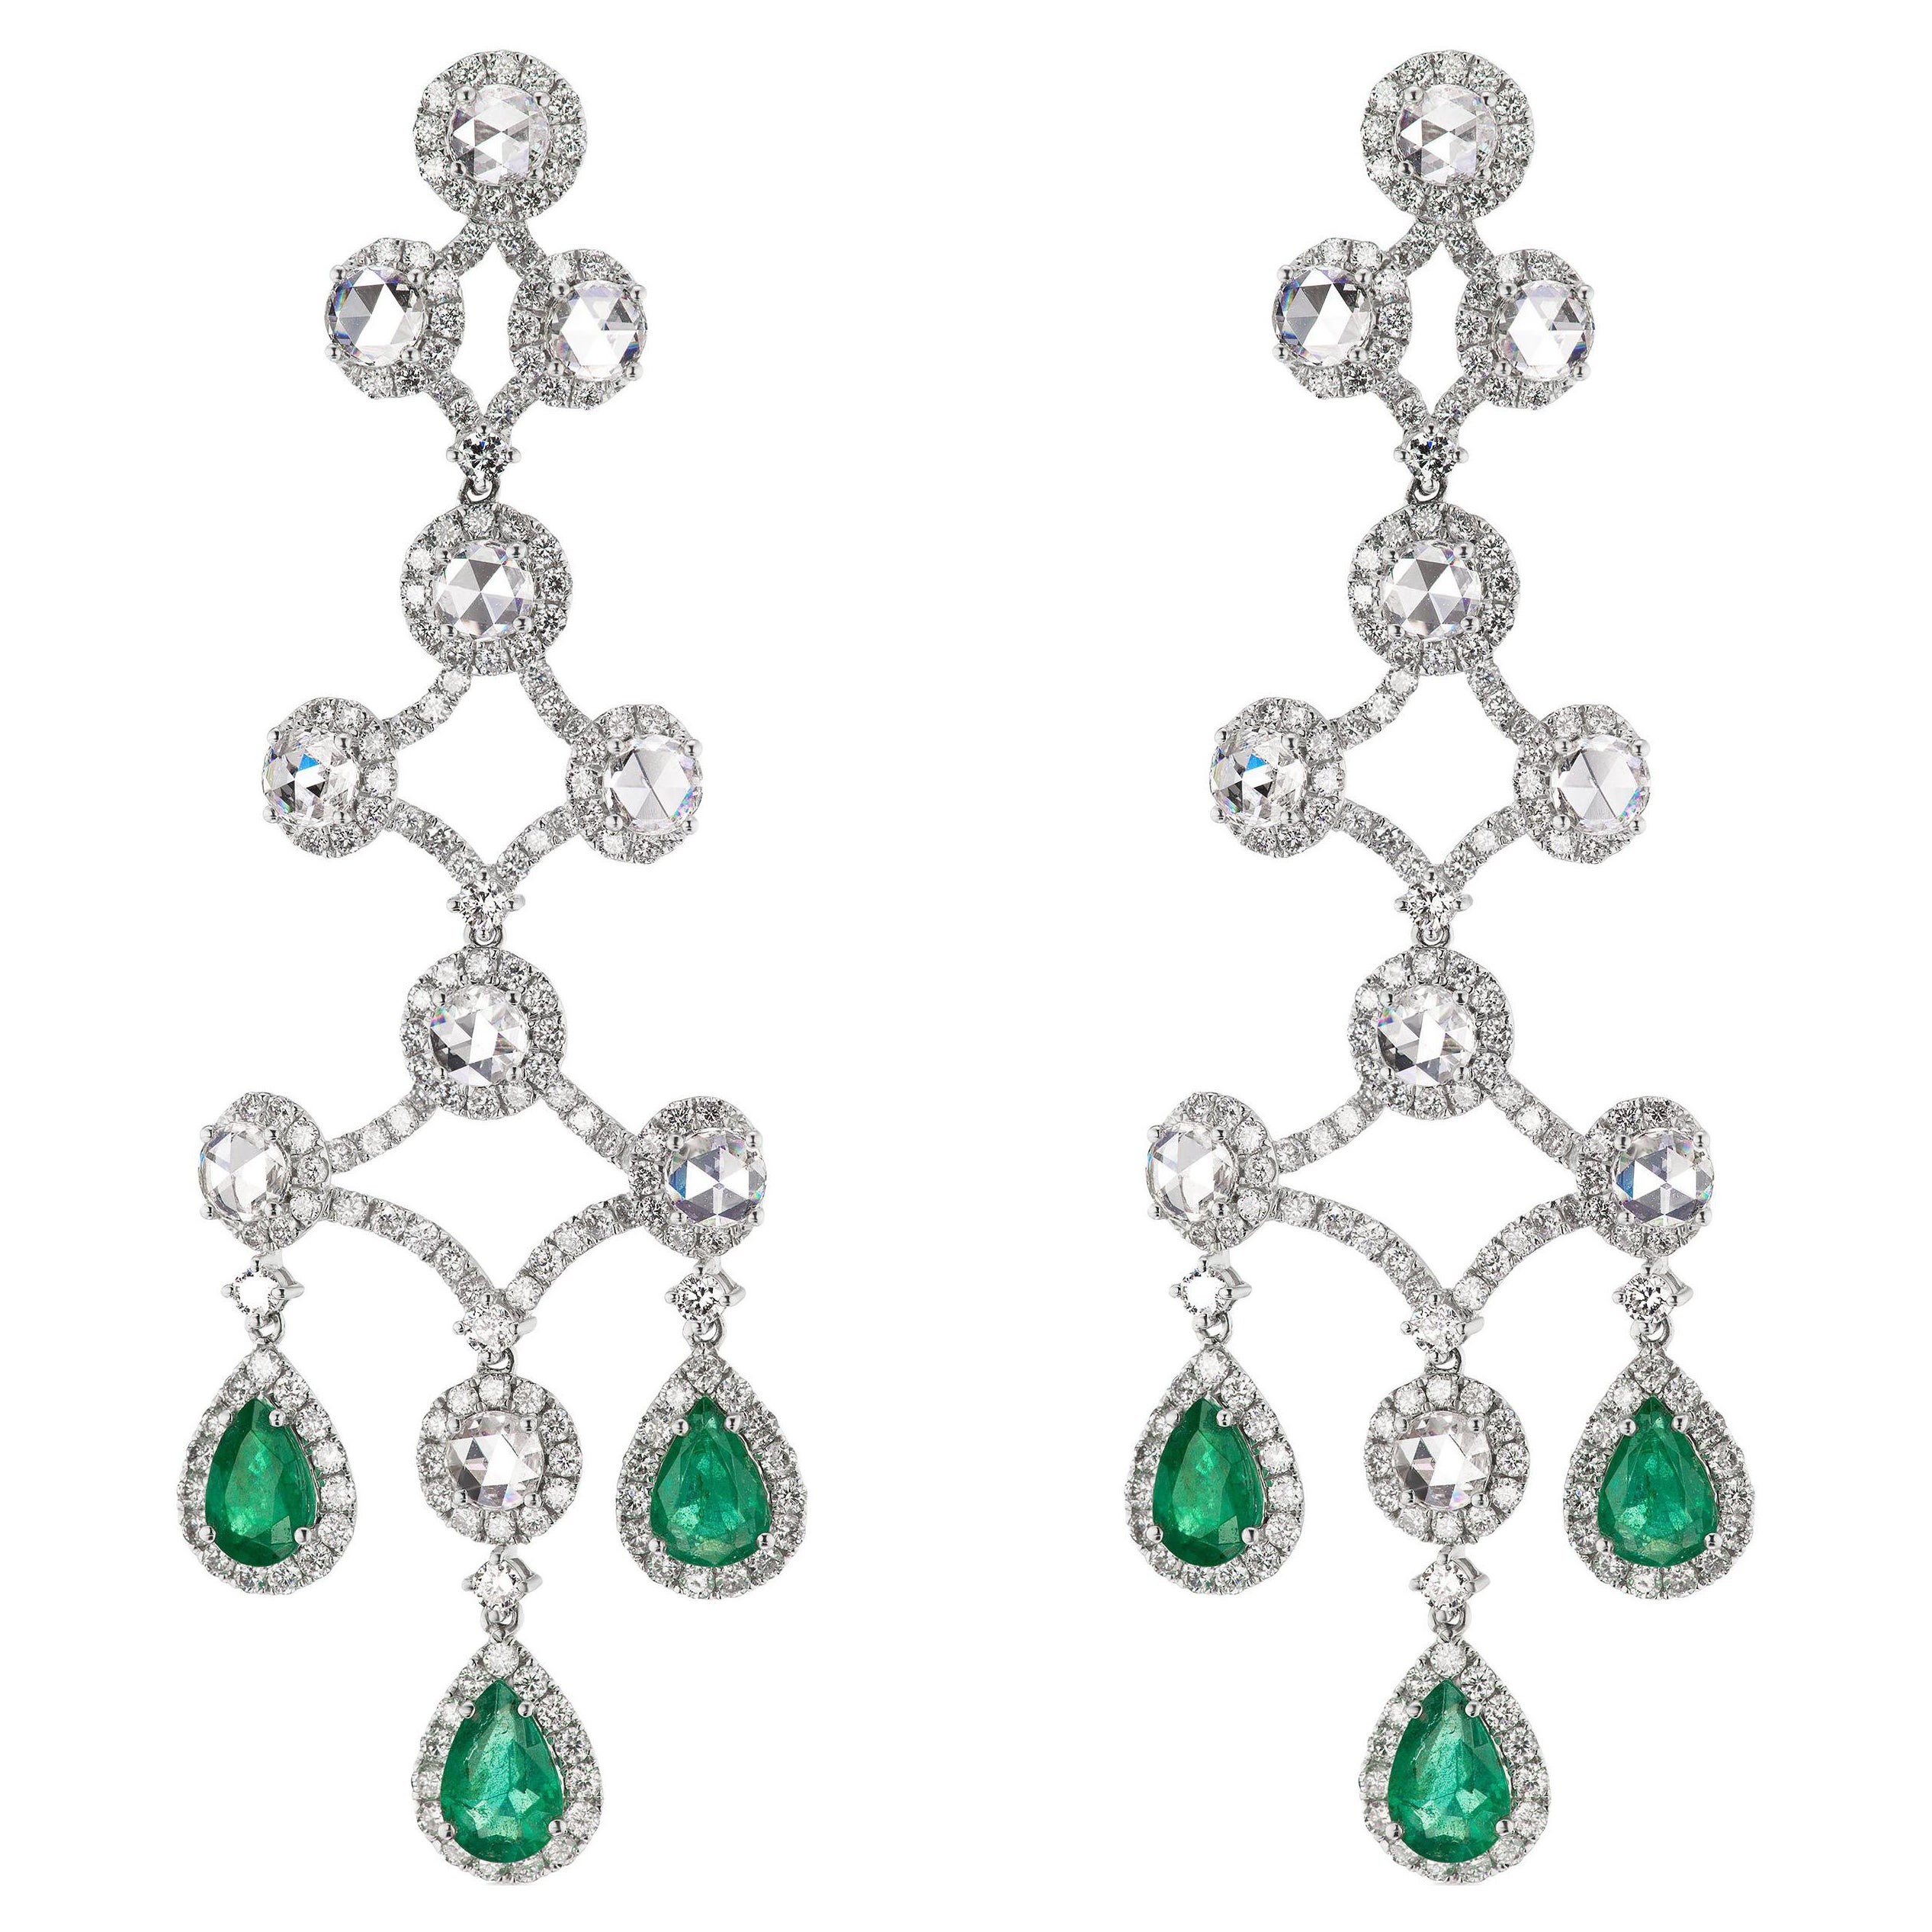 3.5ct. T.W. Emerald and 8.3ct. T.W. Diamond Chandelier Earrings, 18K White Gold For Sale